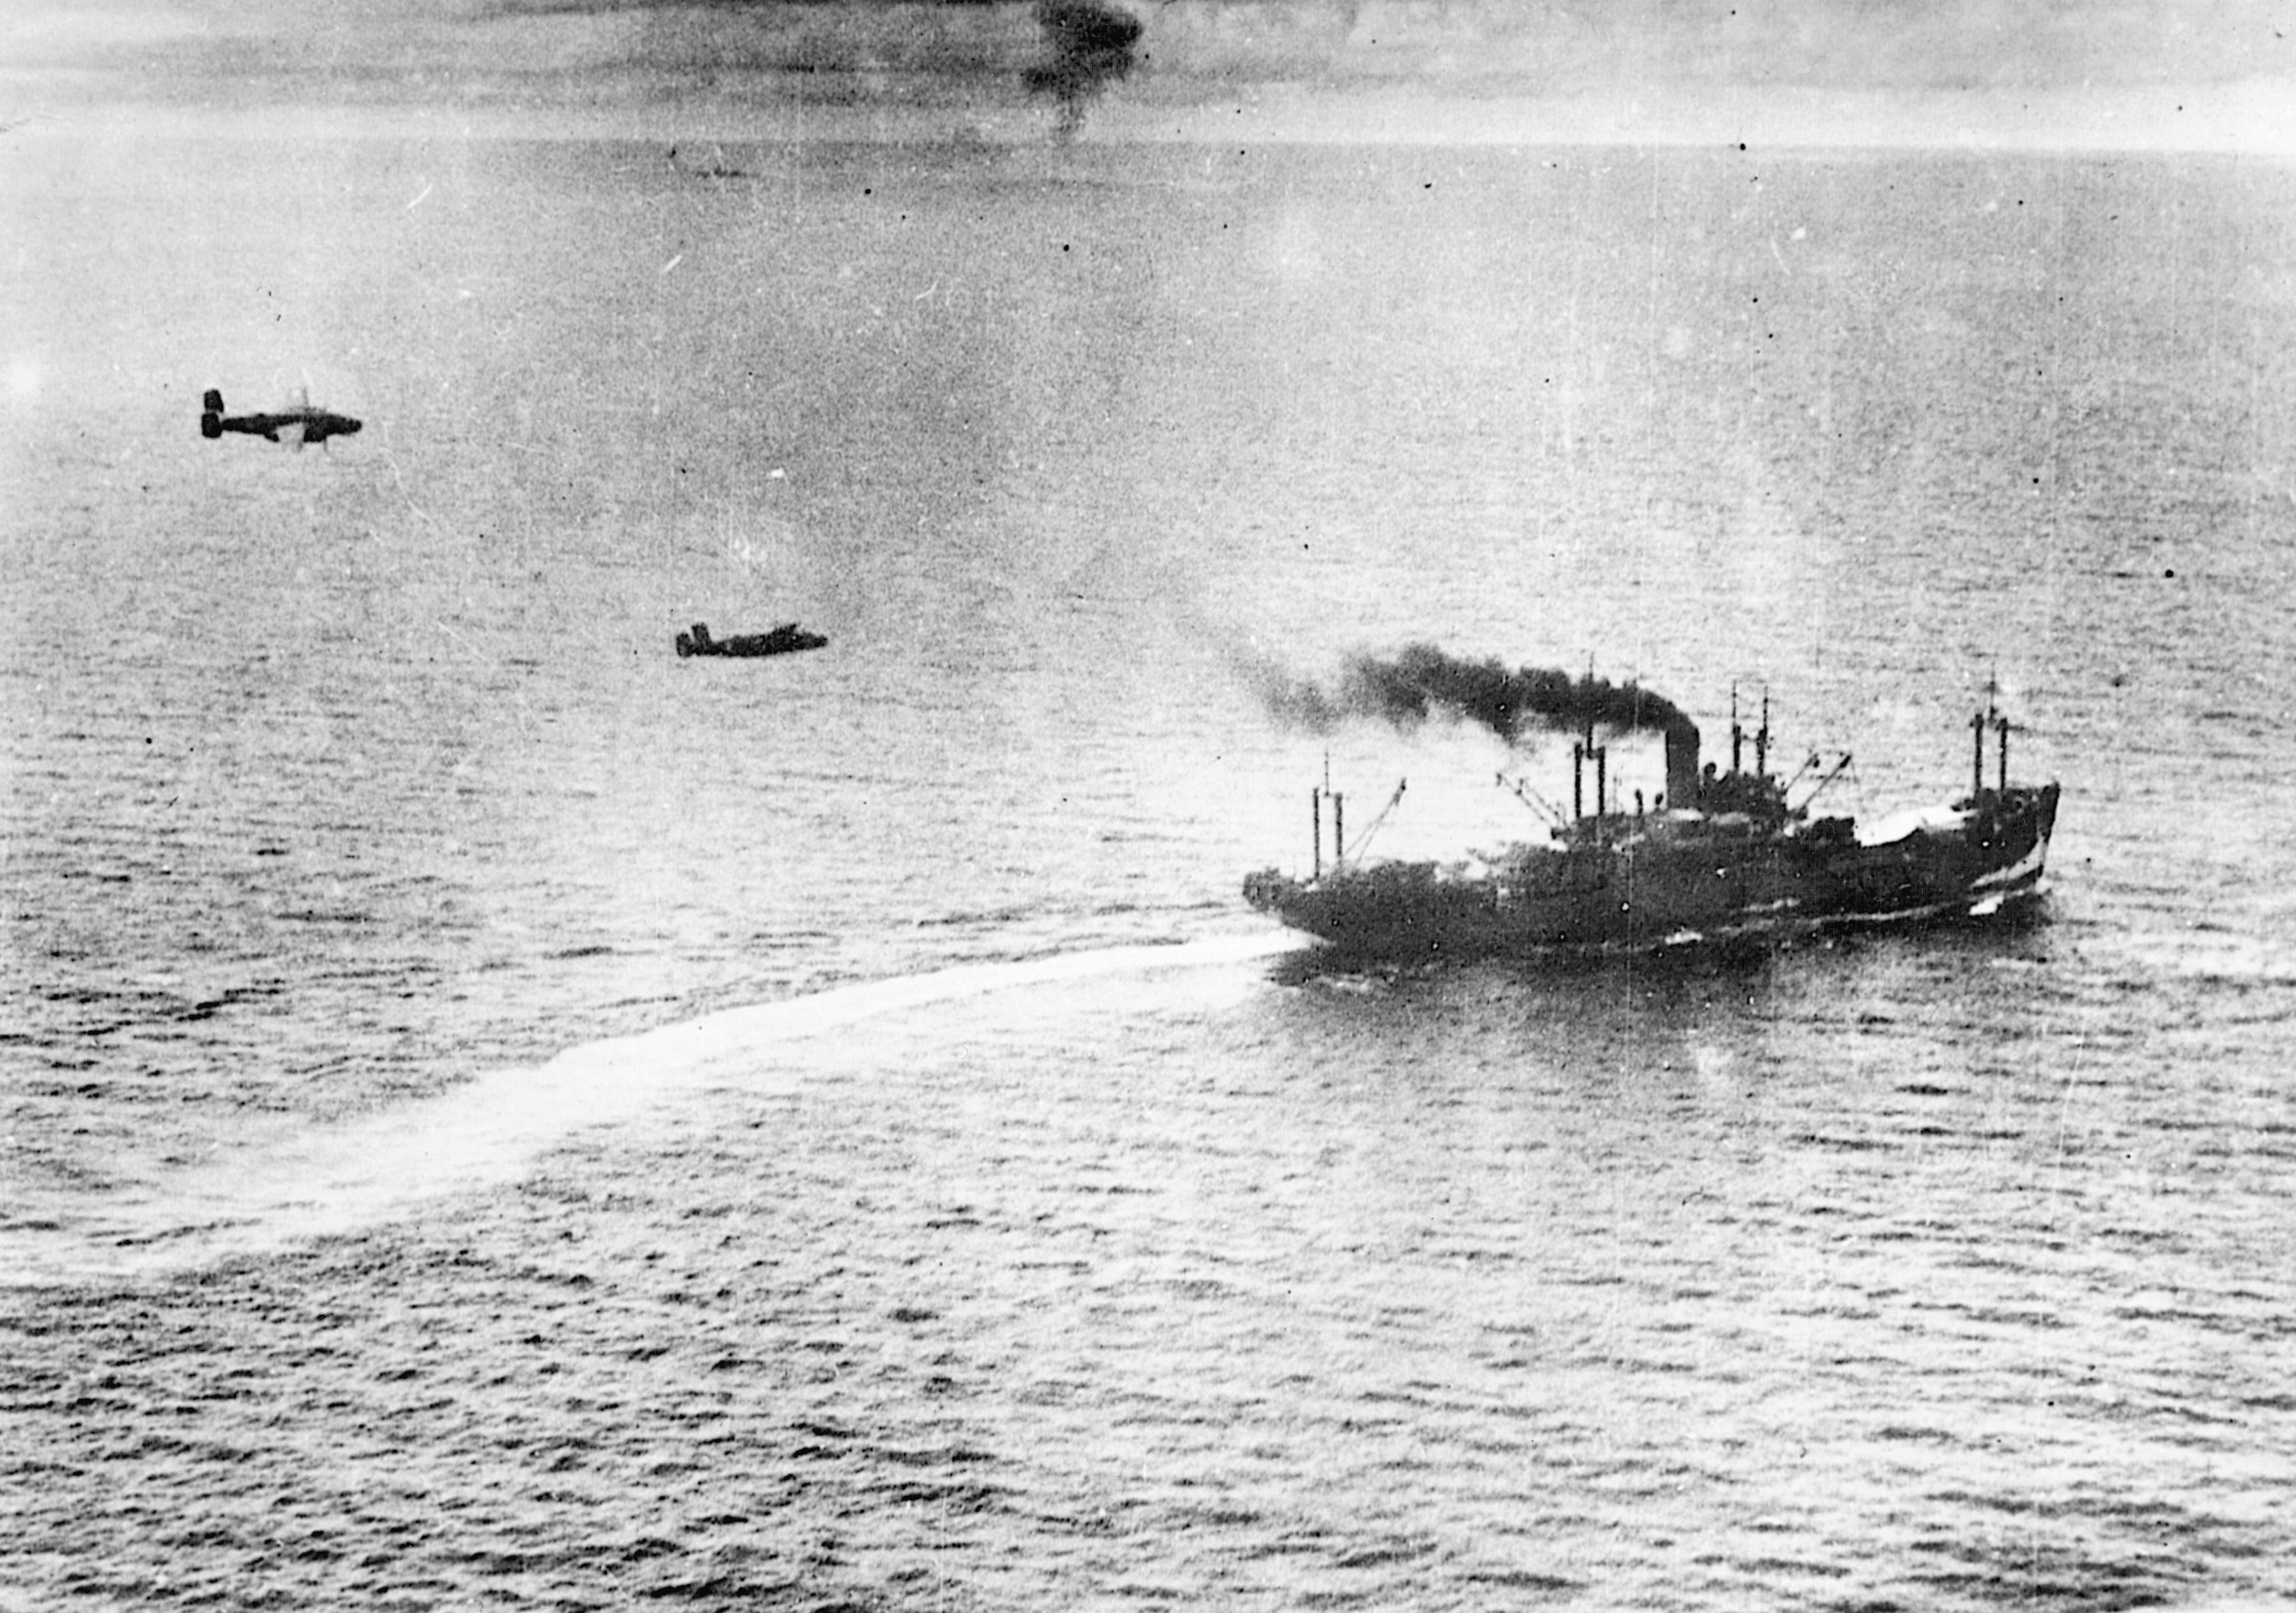 Sweeping in at mast height, a pair of U.S. medium bombers prepares to drop its payload on a Japanese merchant ship during the Battle of the Bismarck Sea.